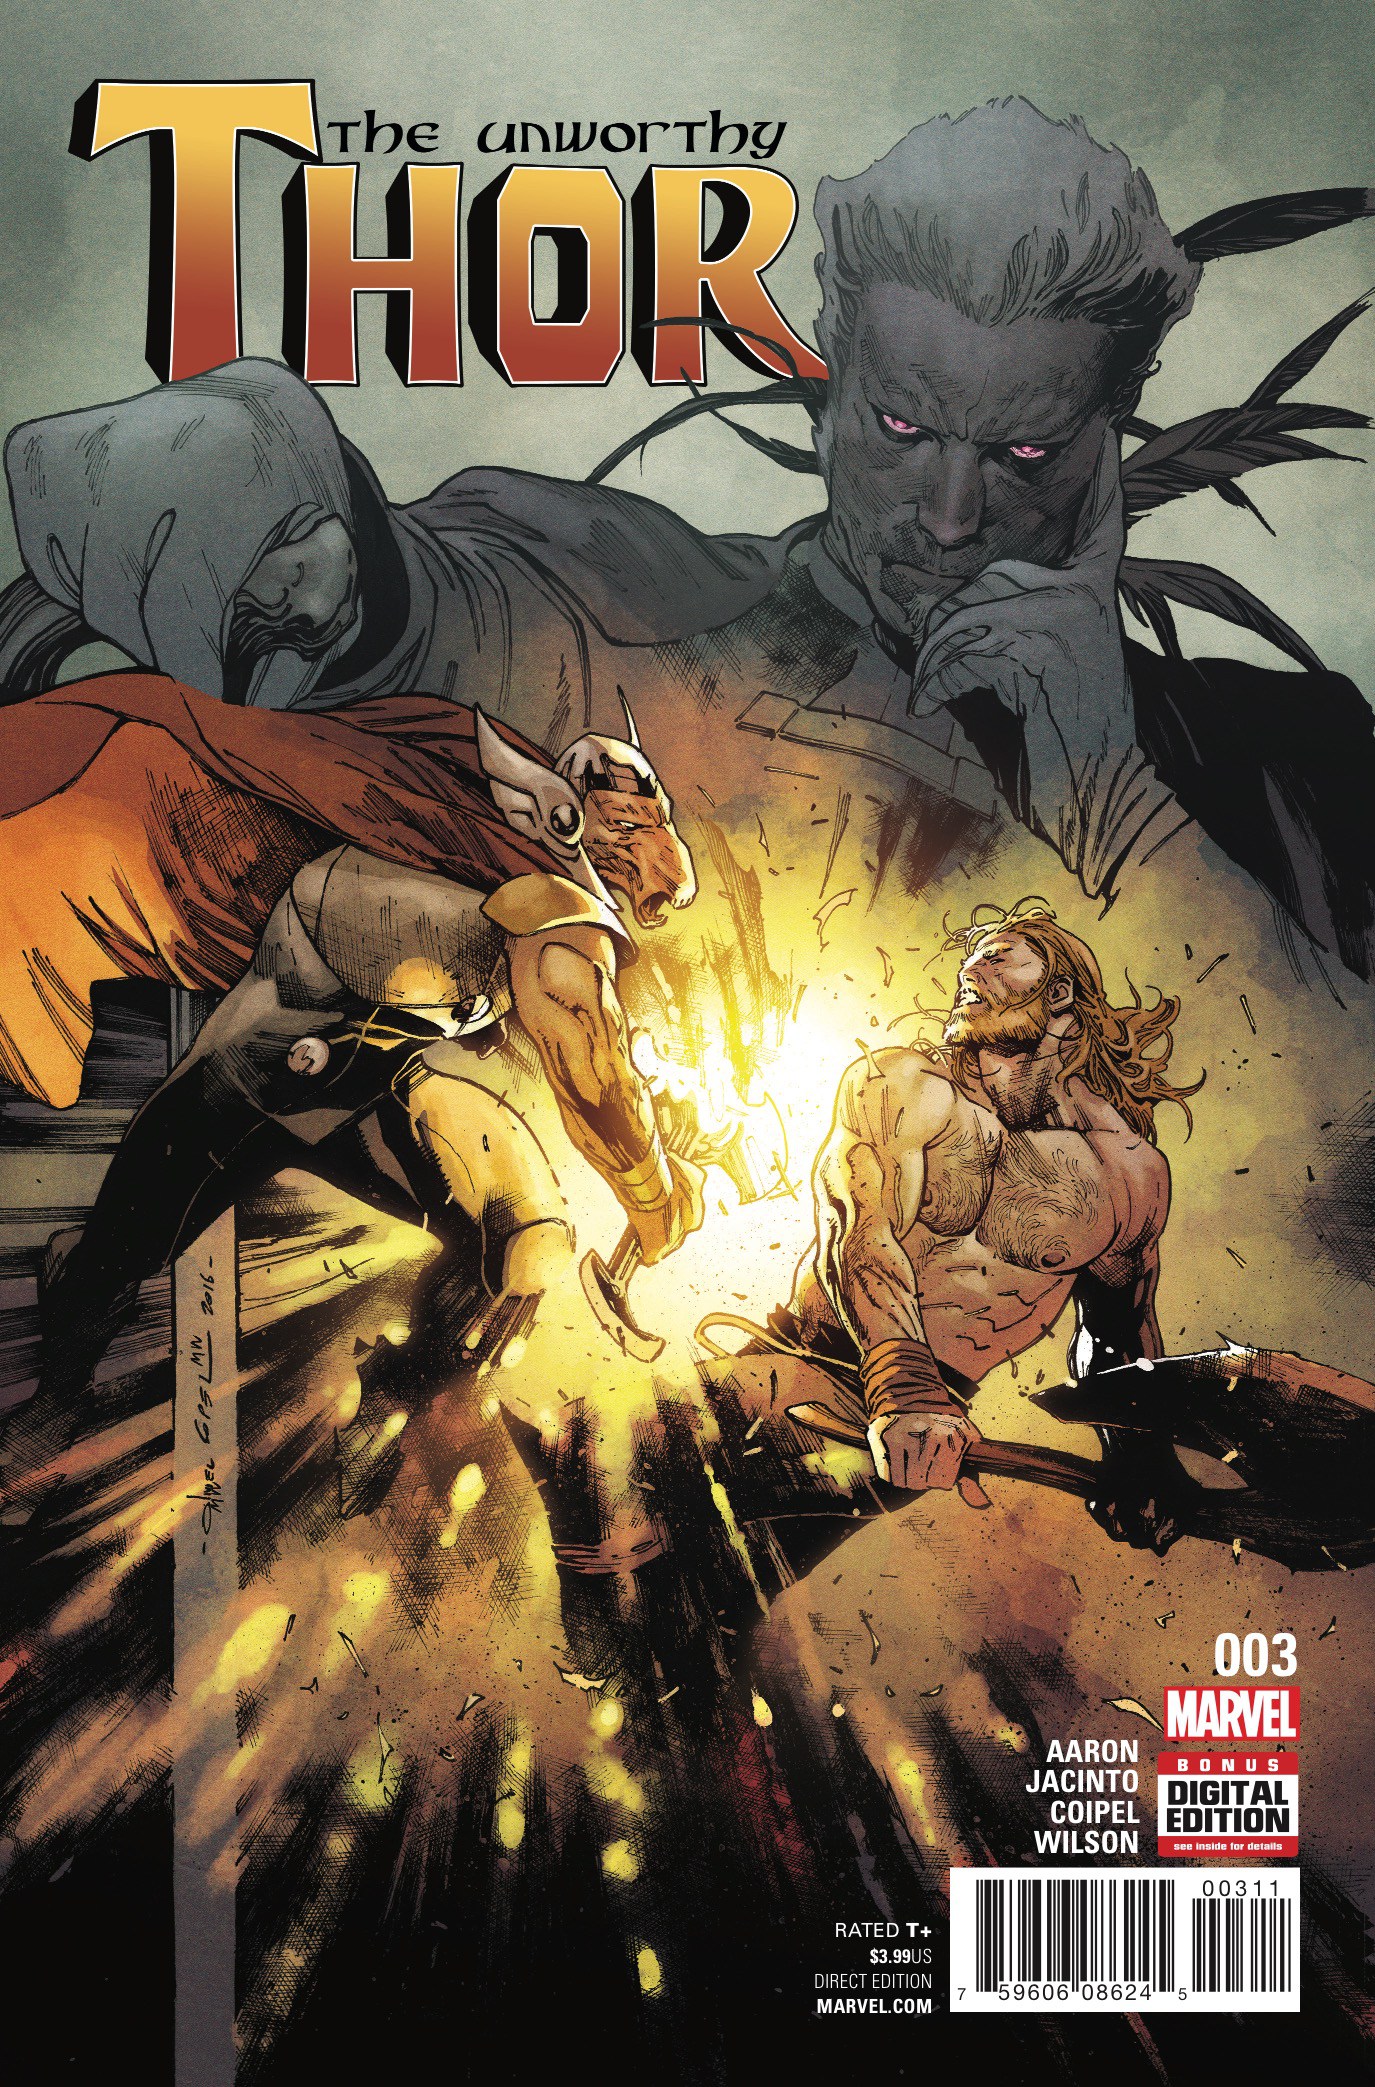 The Unworthy Thor #3 Review